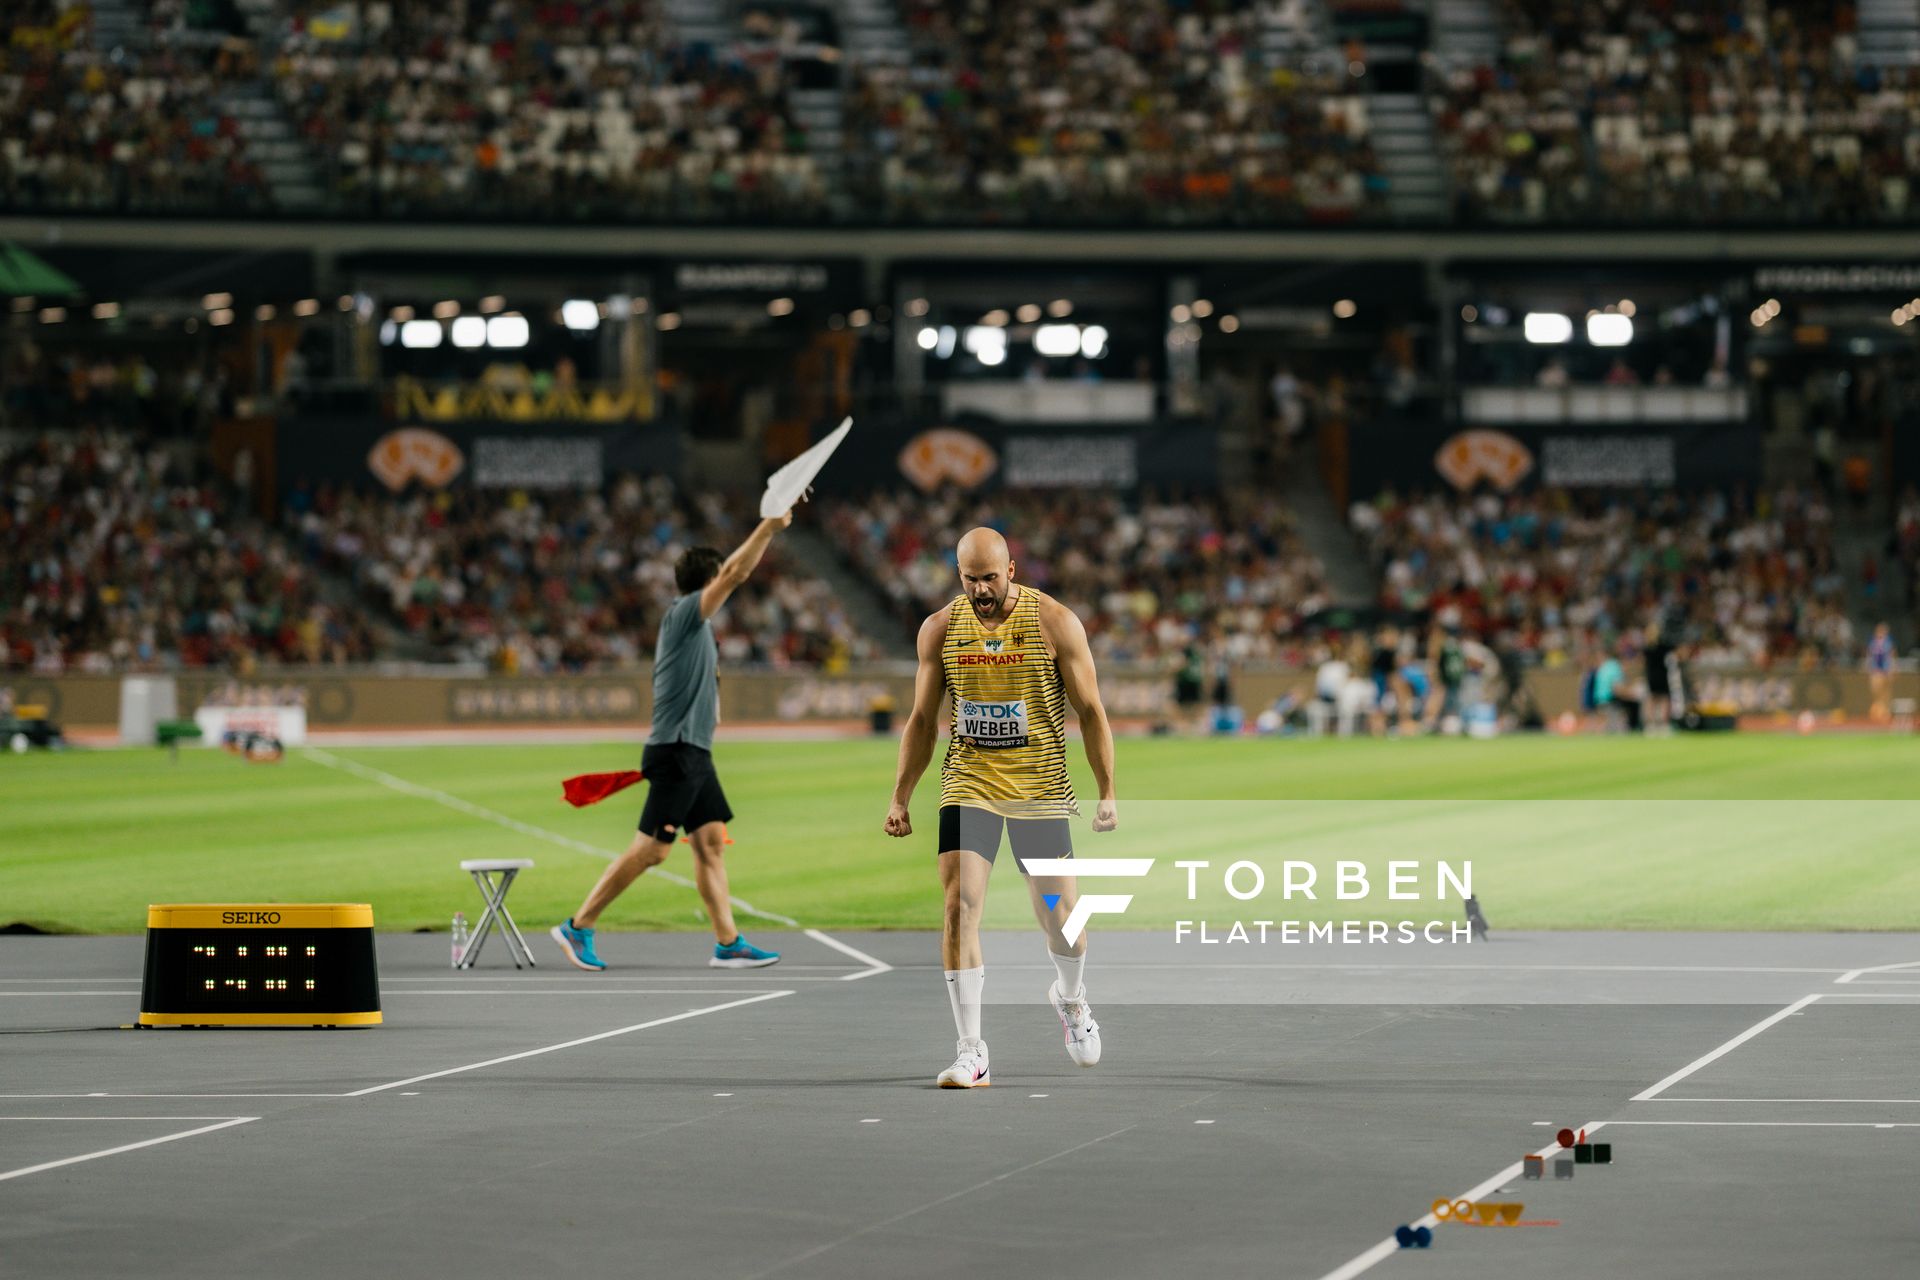 Julian Weber (GER/Germany) during the Javelin Throw on Day 9 of the World Athletics Championships Budapest 23 at the National Athletics Centre in Budapest, Hungary on August 27, 2023.